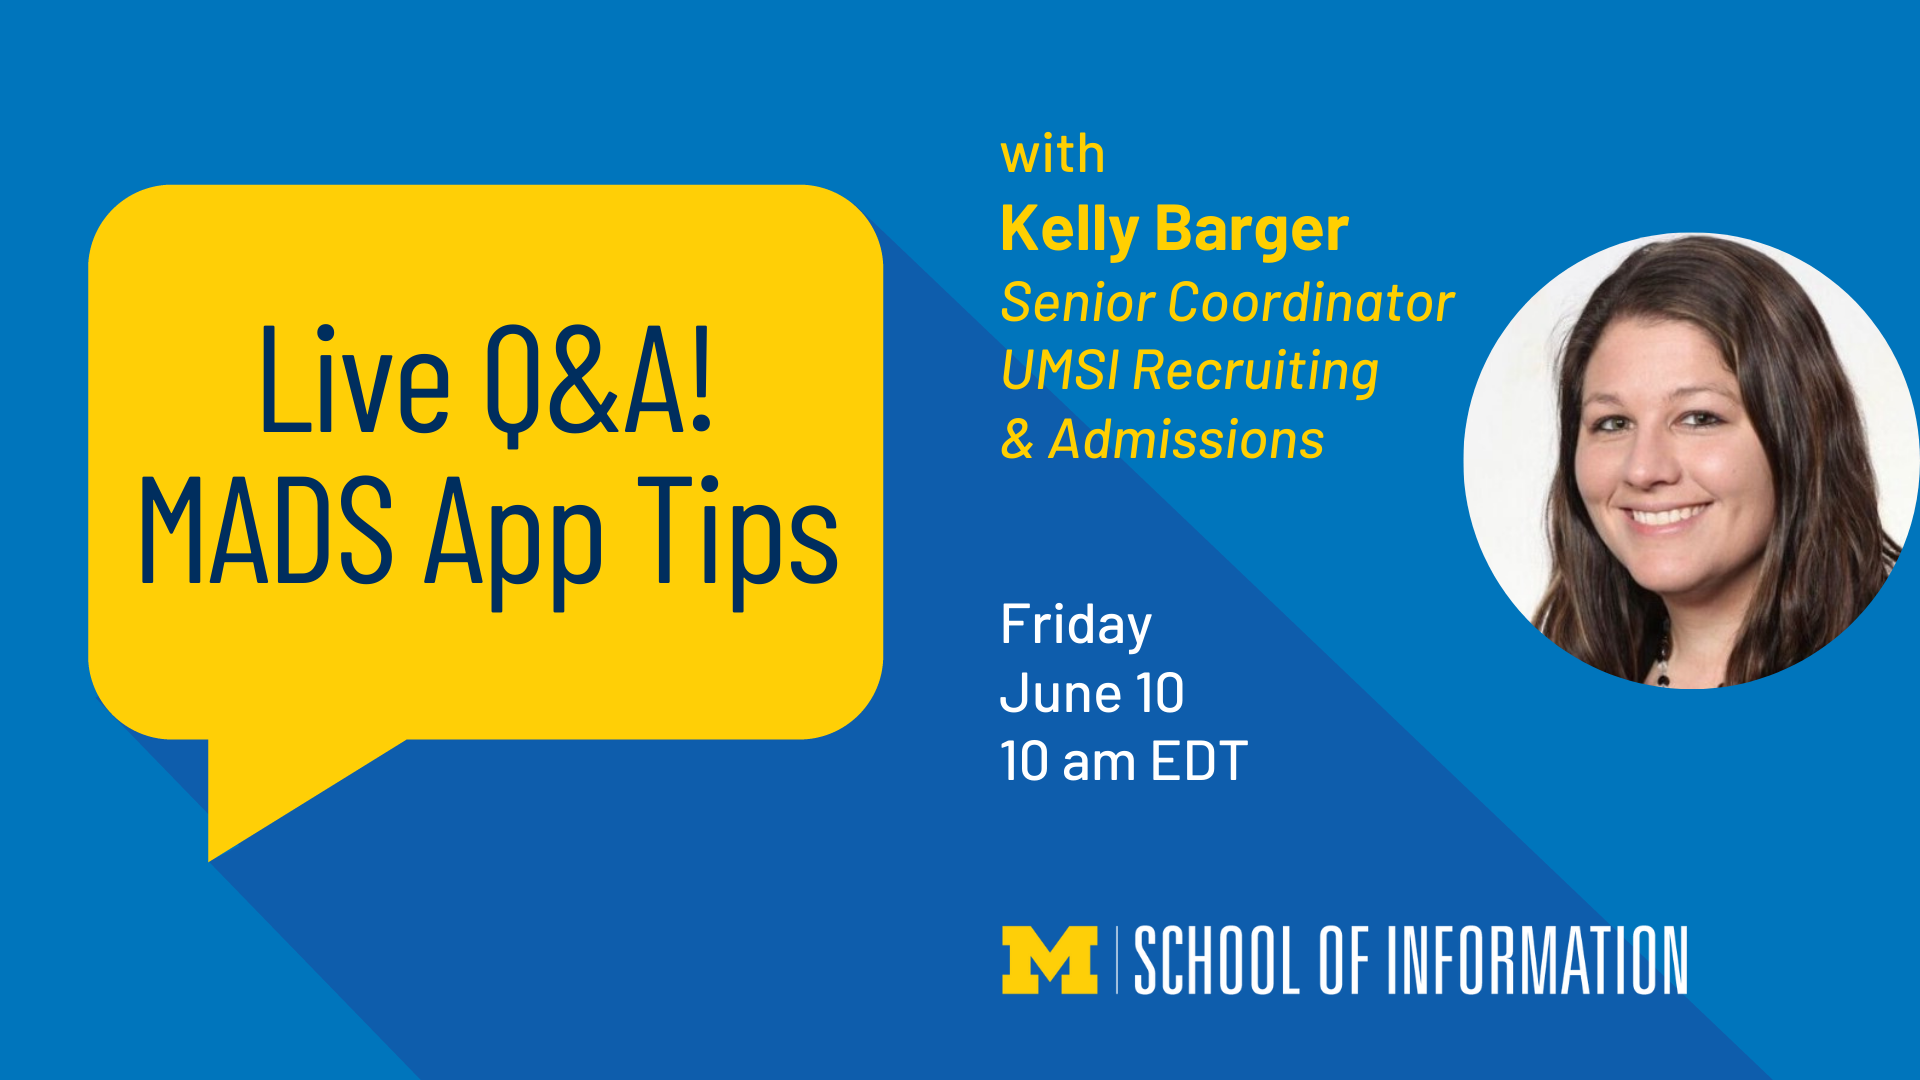 “Live Q&A! MADS App Tips with Kelly Barger. Senior Coordinator, UMSI Recruiting & Admissions. Friday, June 10. 10 am EDT.” 